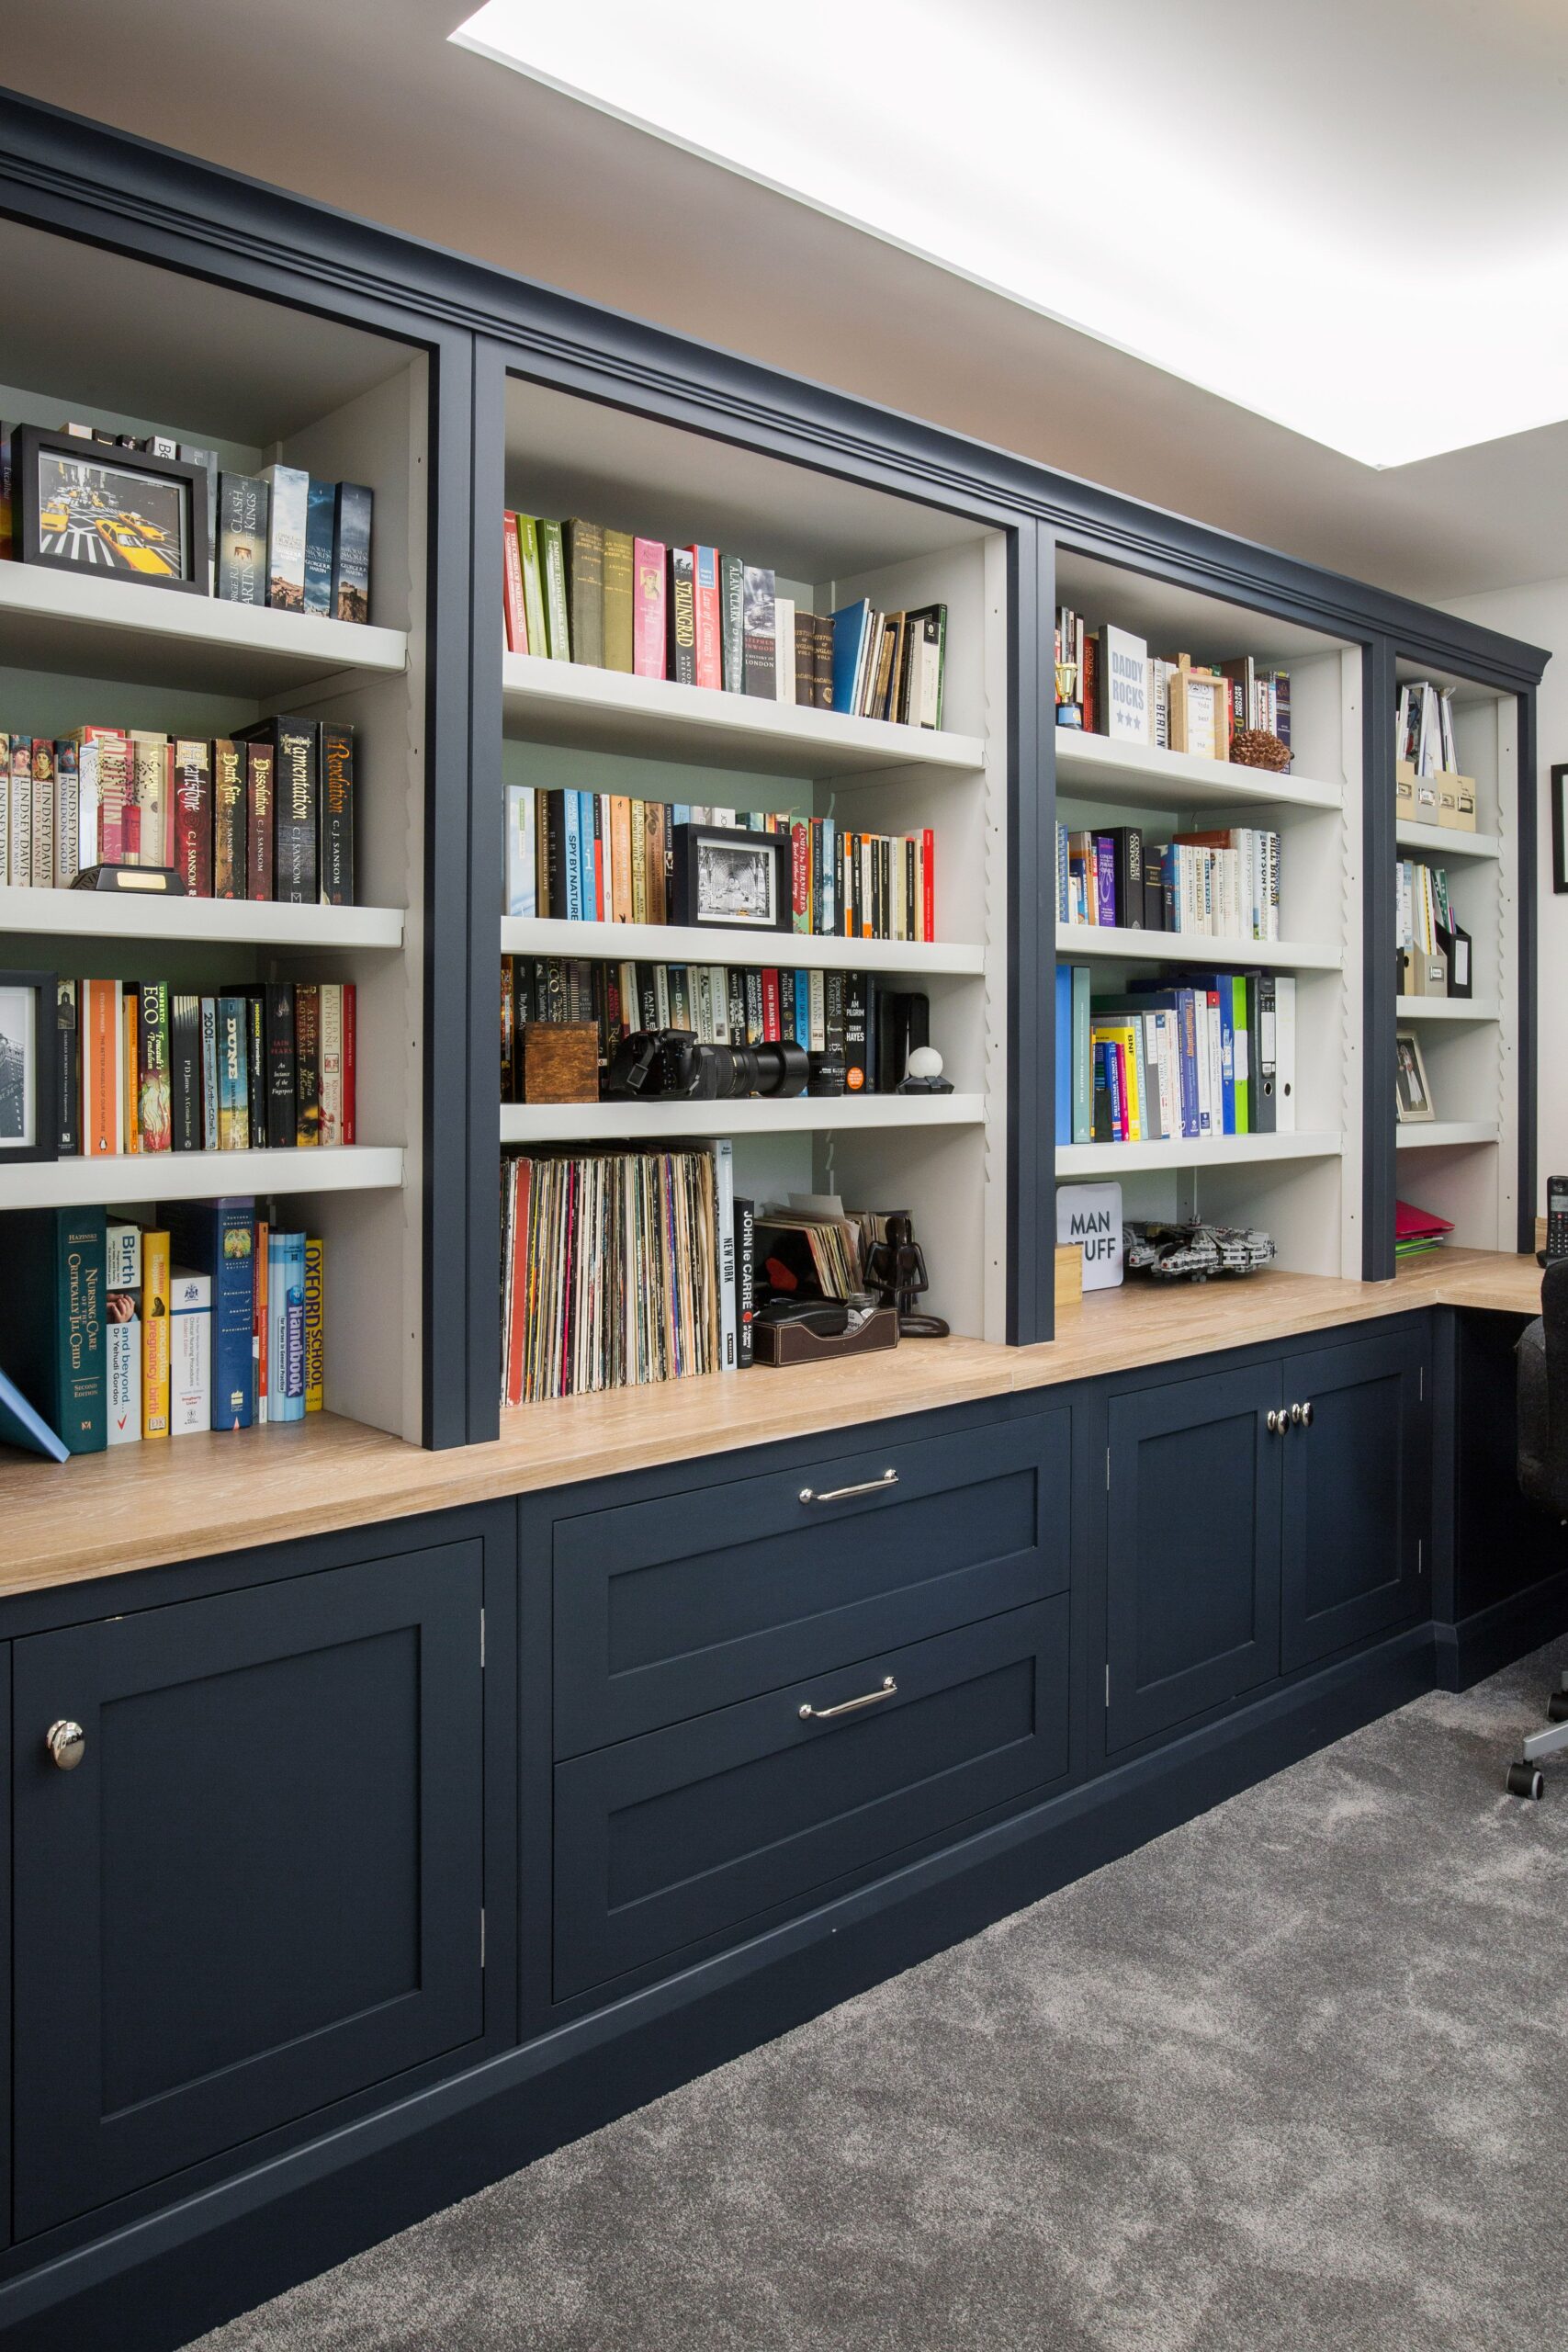 Get Organized: Office Storage Cabinets to
Declutter Your Workspace